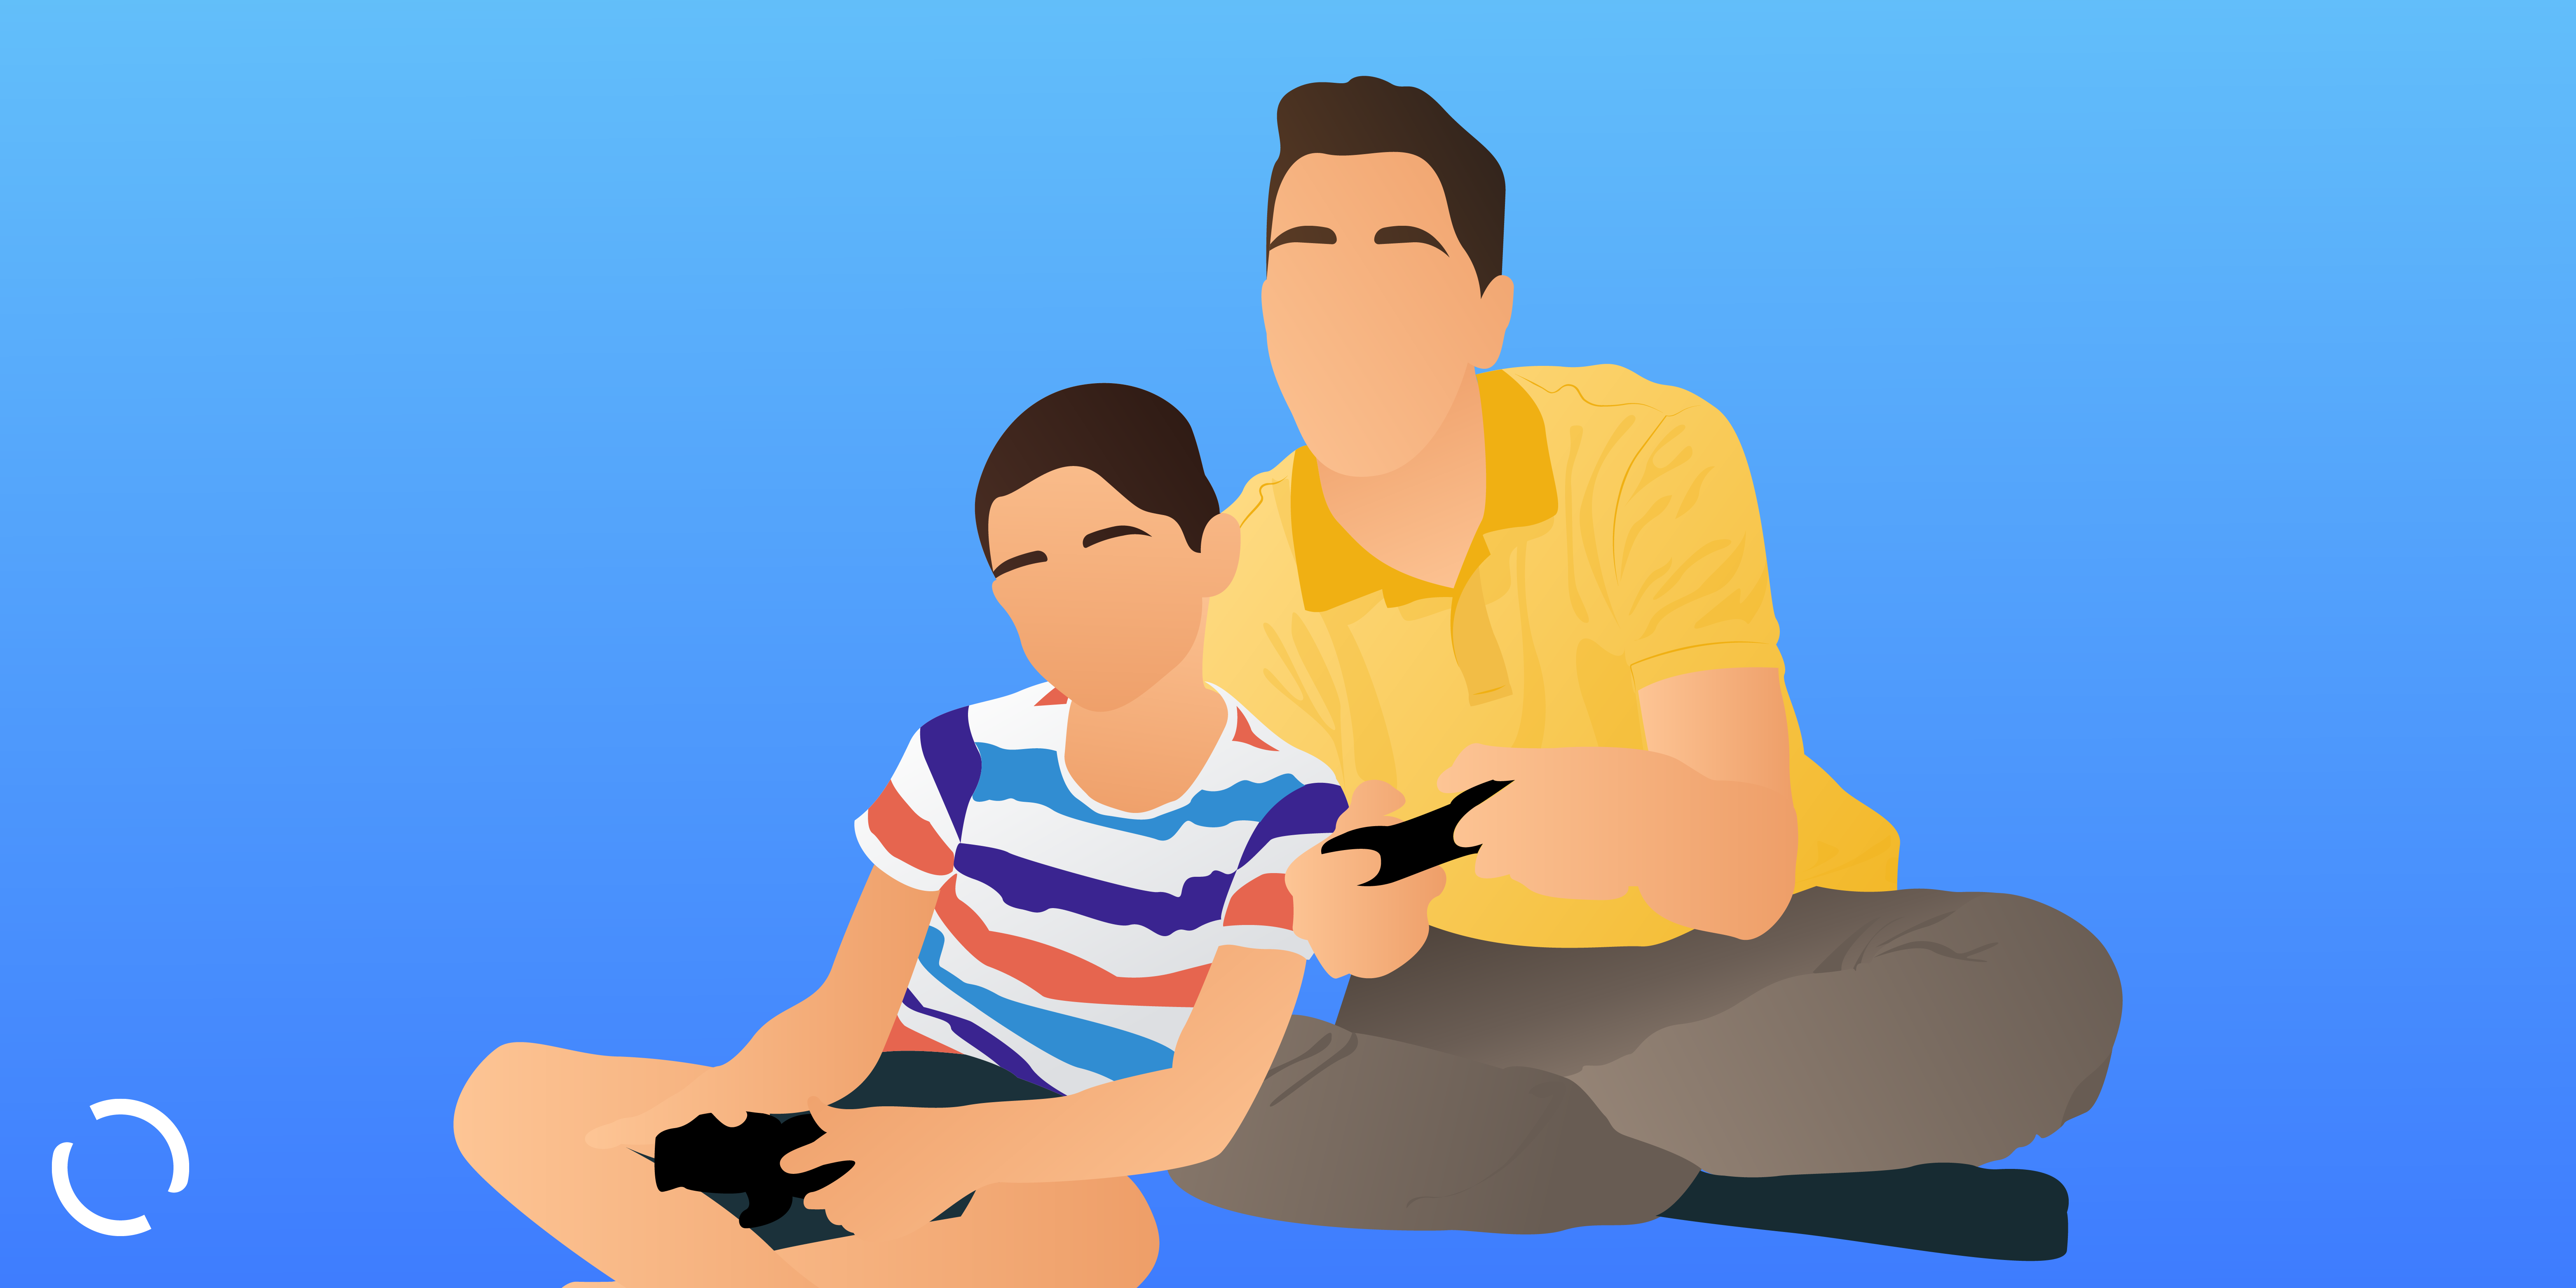 Man in a yellow shirt and boy in a striped shirt sit together on the floor holding video game controllers. 